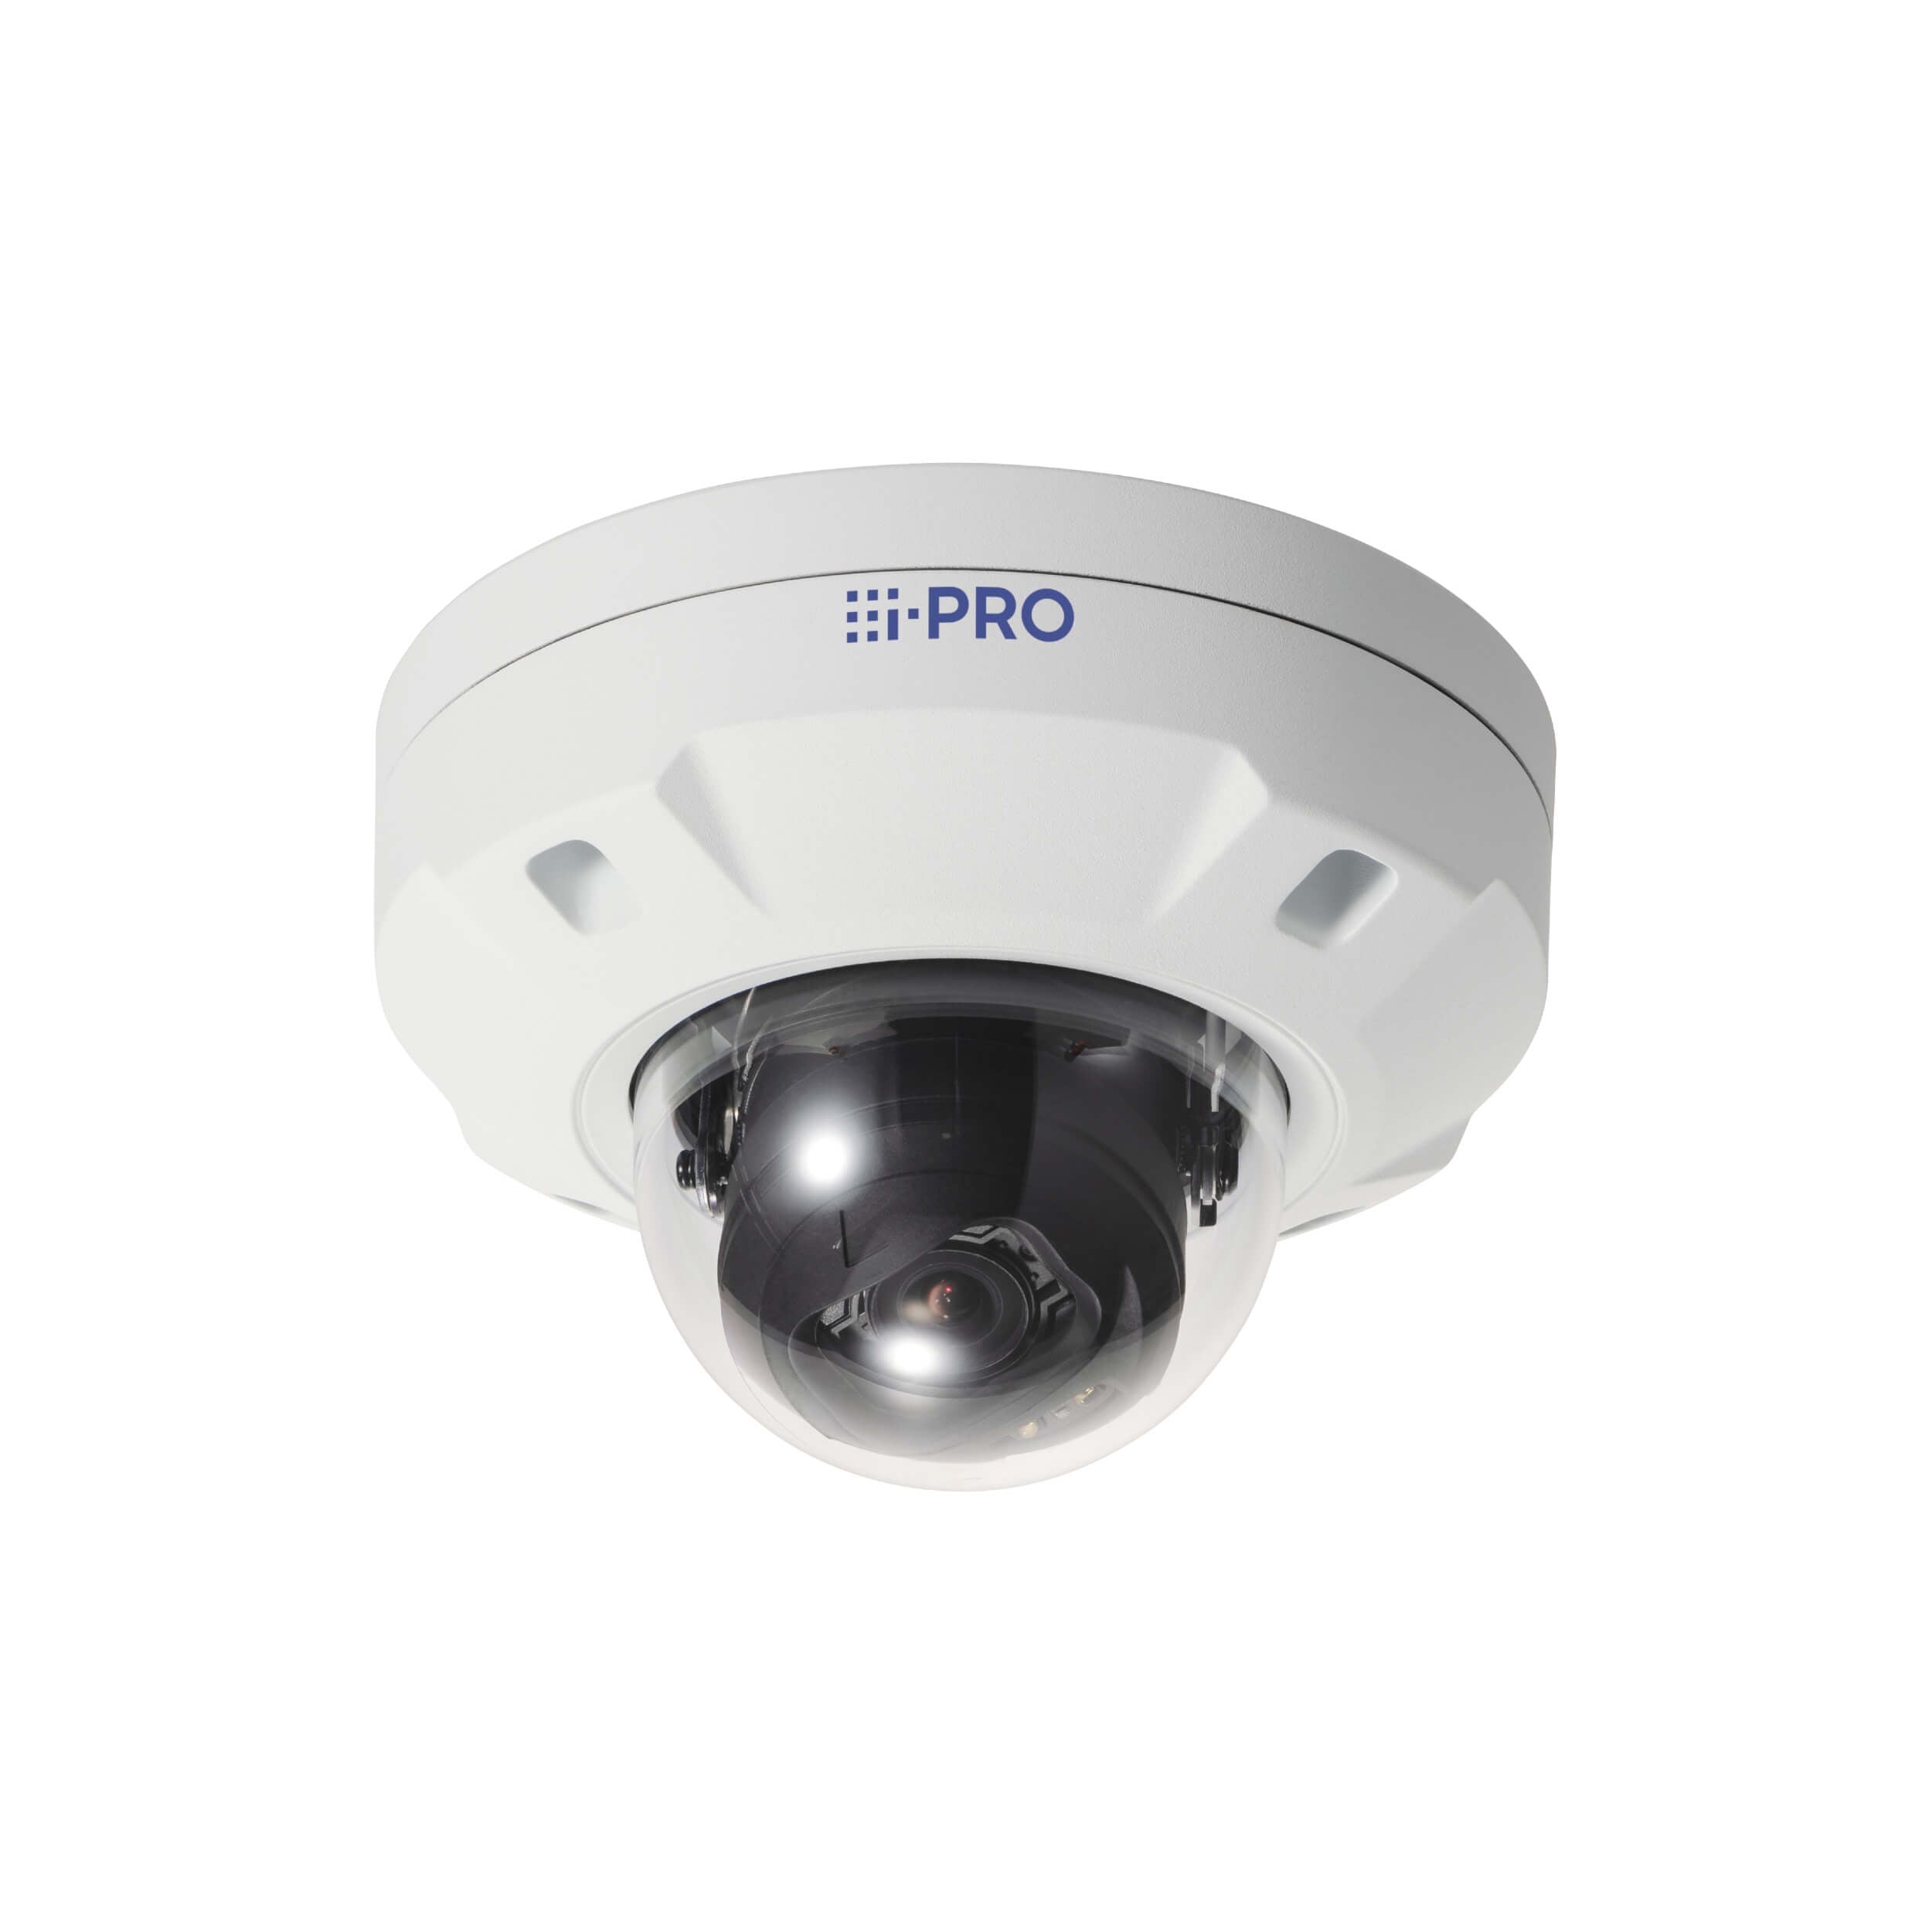 Panasonic WV-S25700-V2LG 4K Vandal Resistant Outdoor Dome Network Camera, Smoke Dome with AI Engine with 4.3-8.6mm Lens